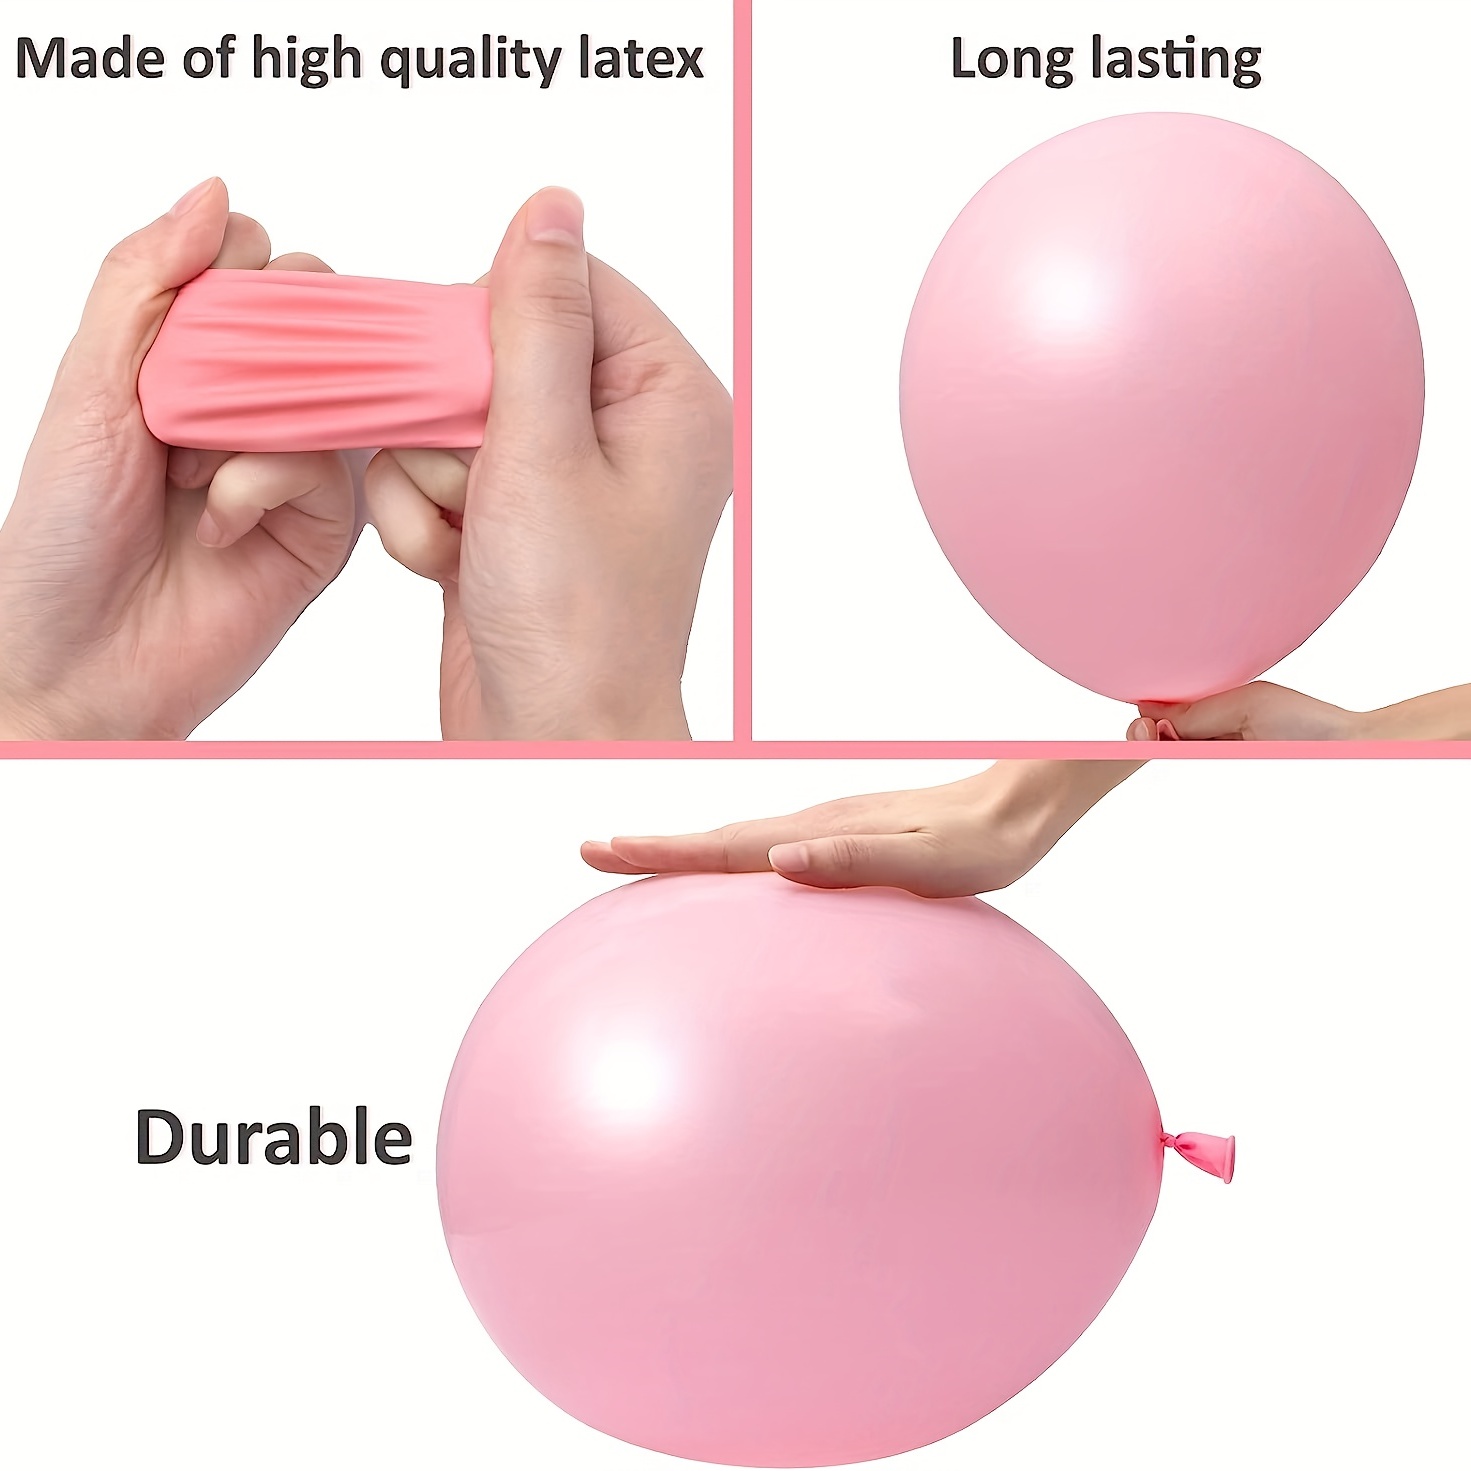 Balloon Decorating Strip for Latex Balloons - Great American Property